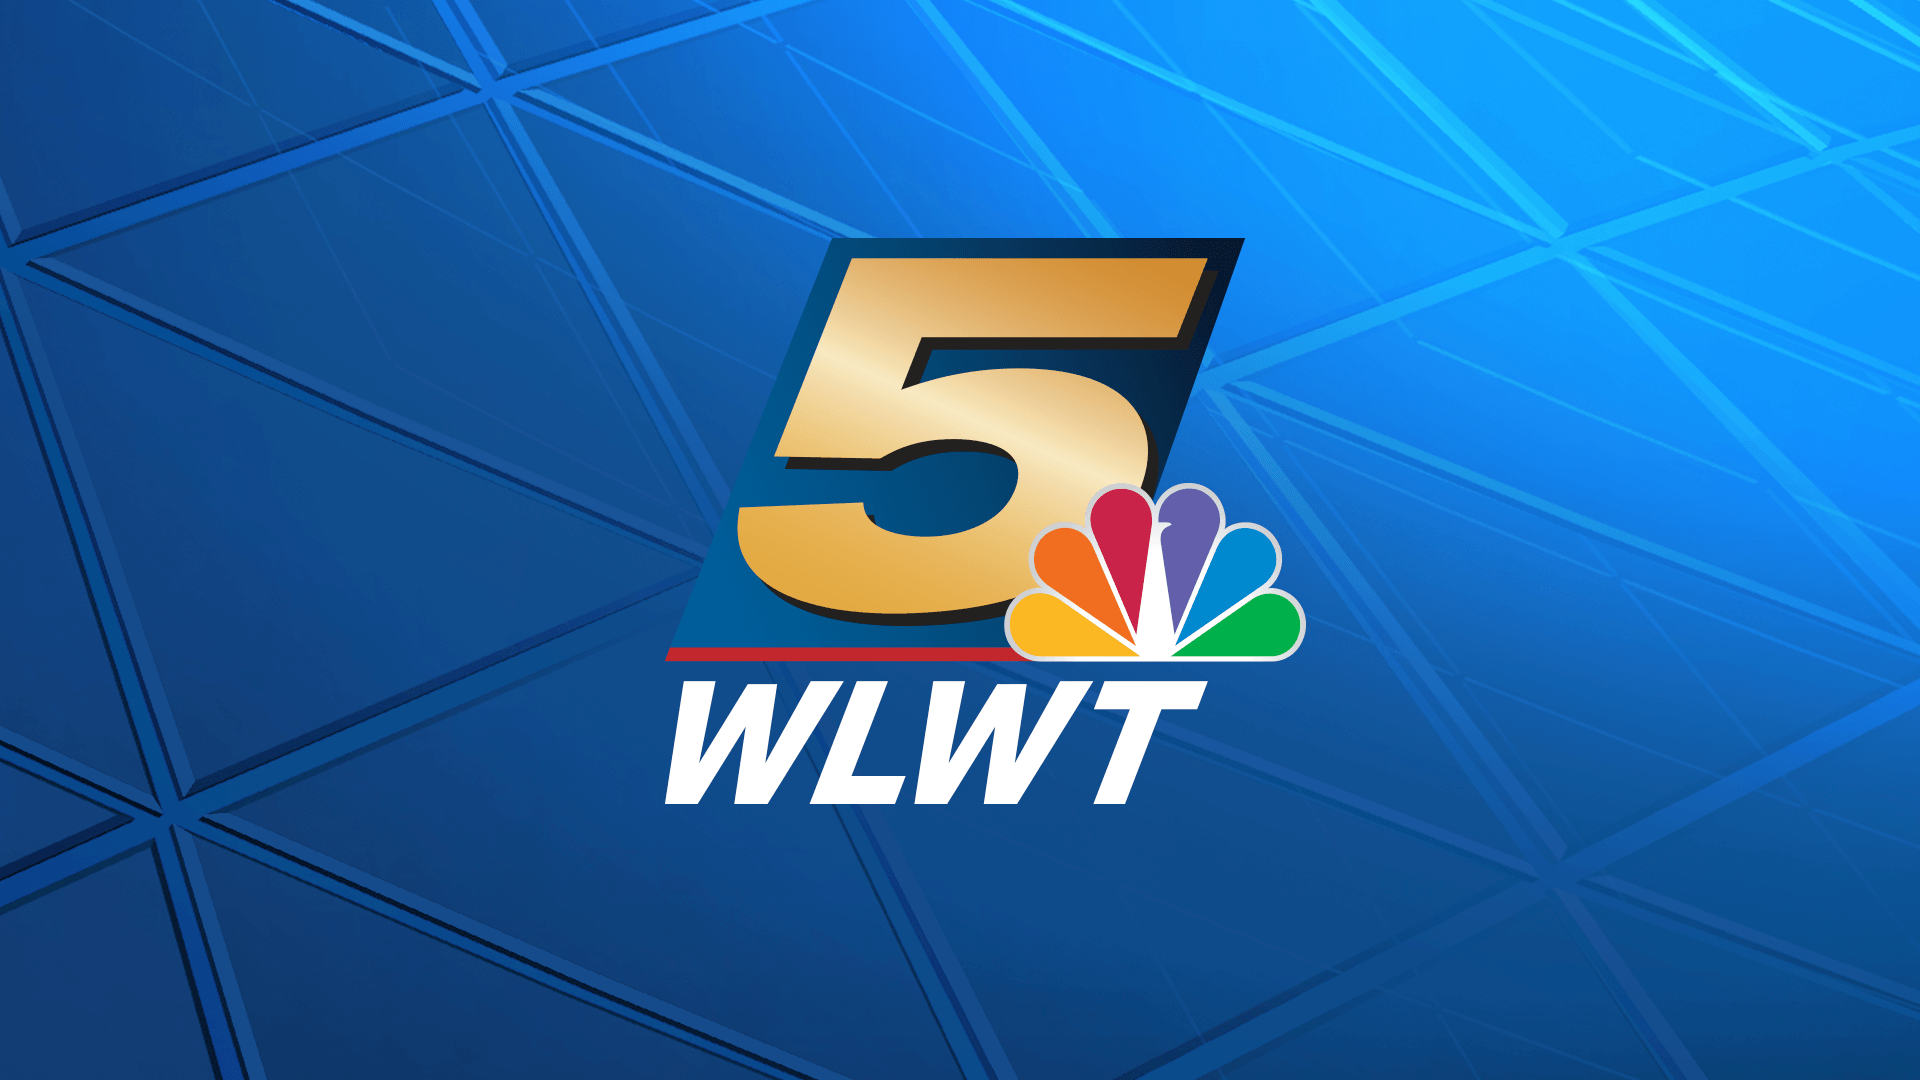 WLWT Logo - WLWT Cincinnati news, weather: Appstore for Android